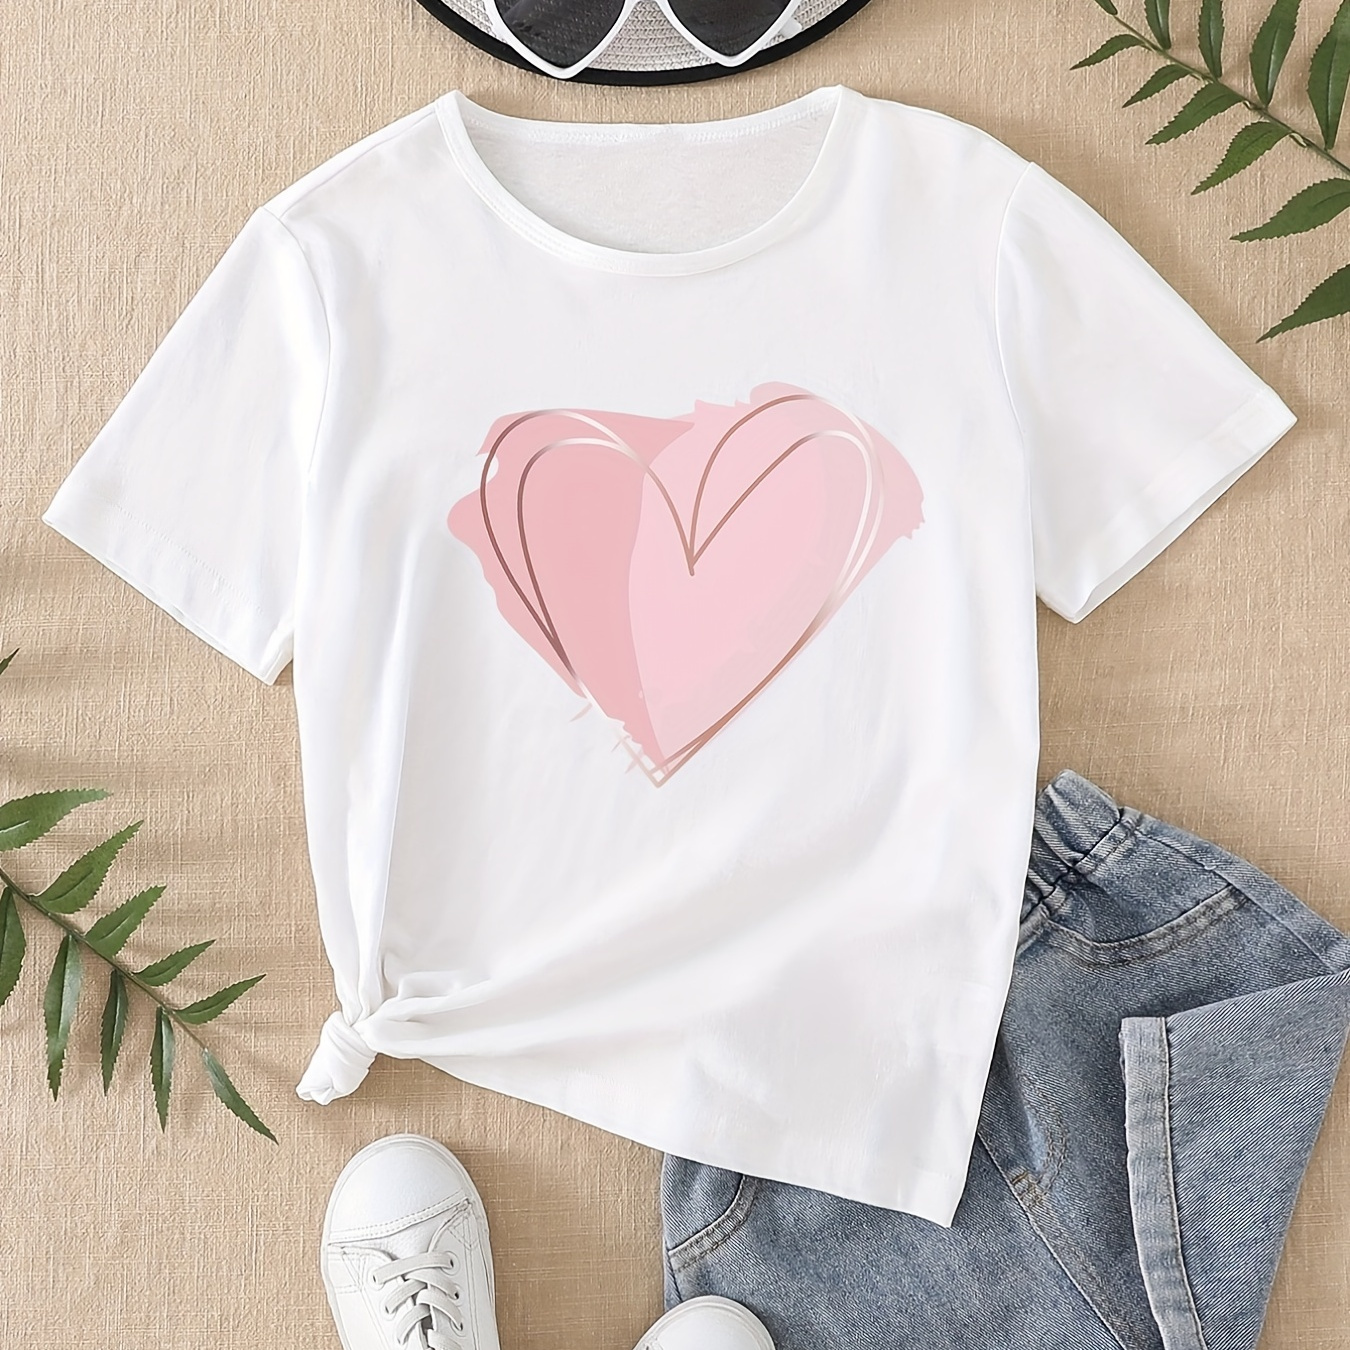 

Girls Heart Graphic T-shirt Daily Casual Short Sleeve Tees Crew Neck Kids Going Out Tops Holiday Summer Clothes